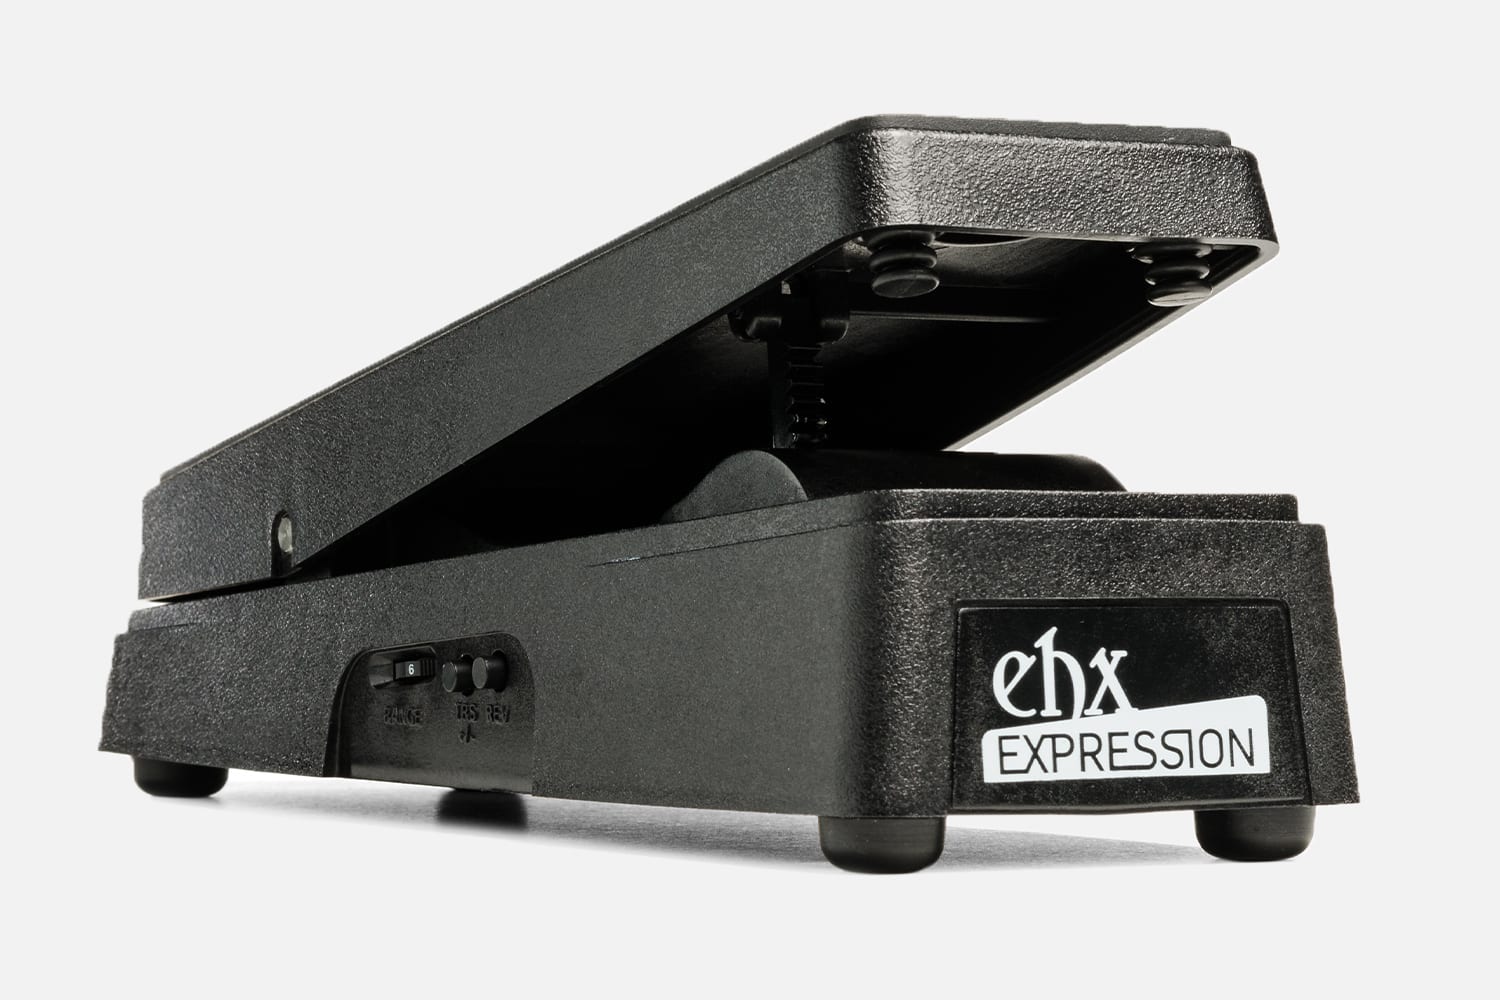 Single Expression Pedal